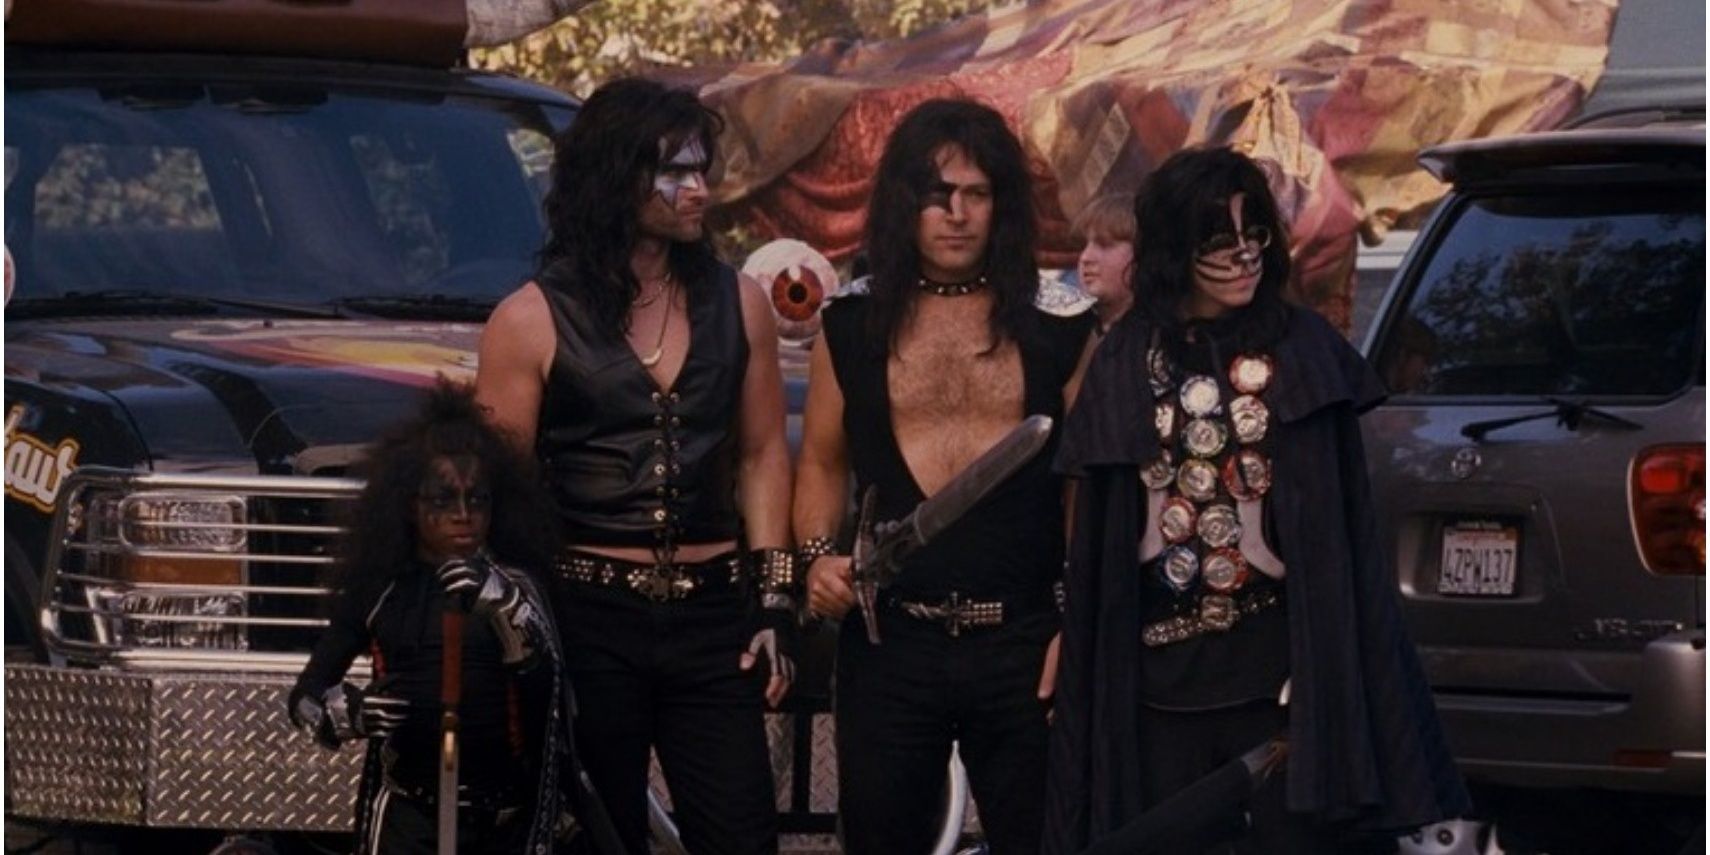 The cast of Role Models dressed like Kiss